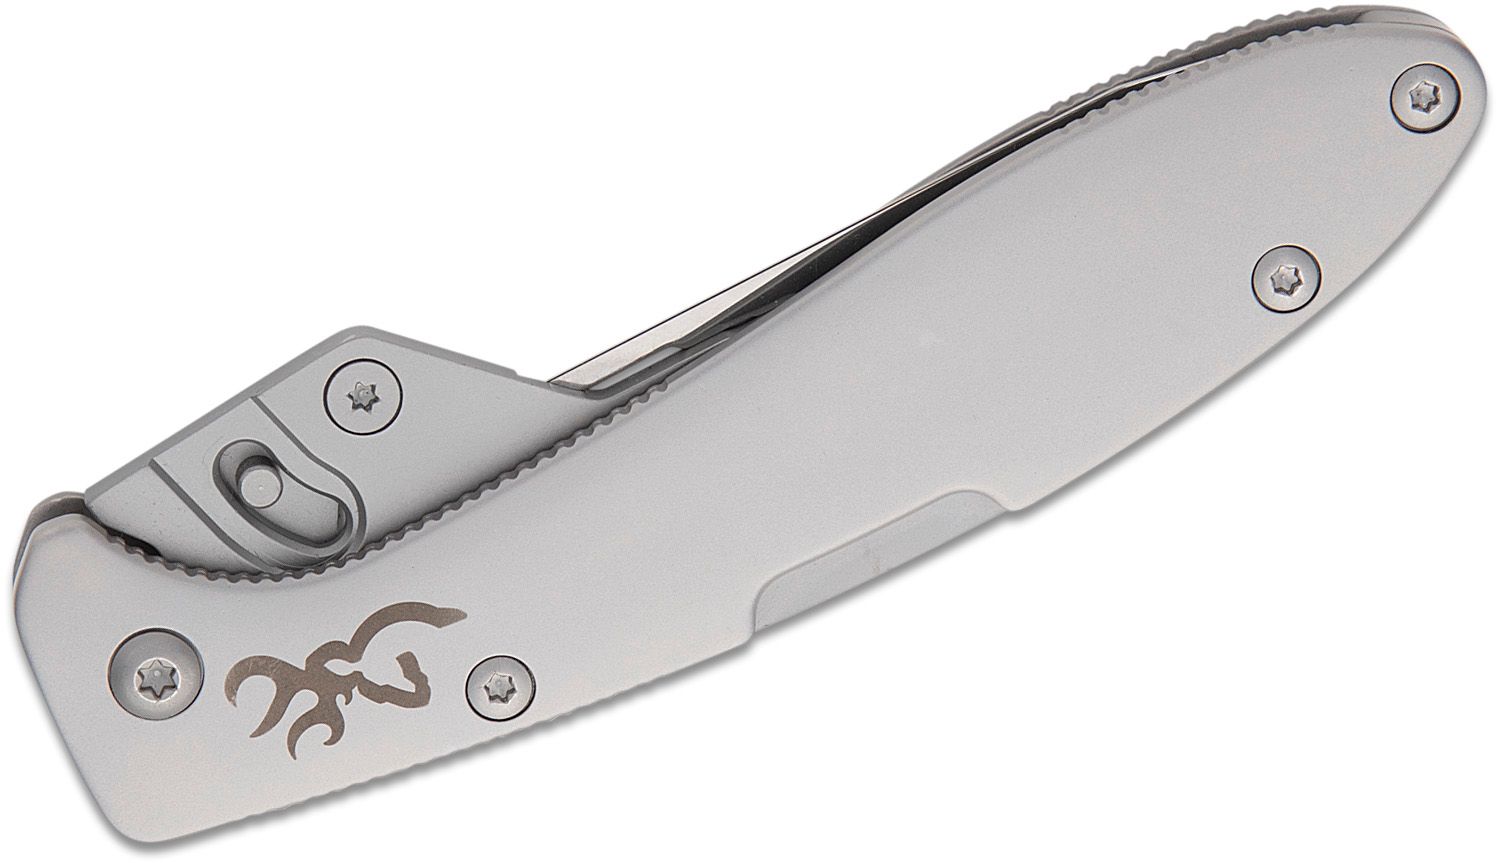 Case 7253 Small Stockman Folding Knife 3-Blade SS Blades